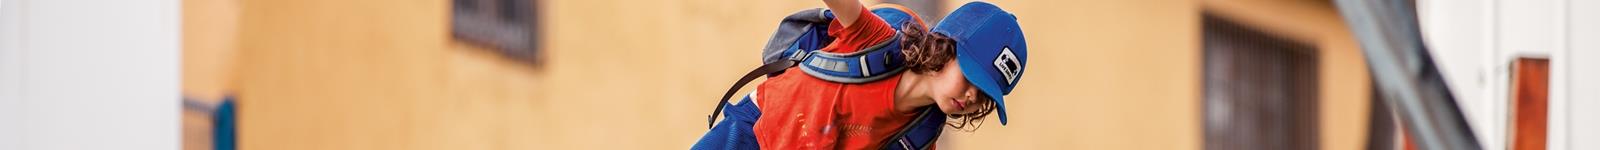 Marmot Kids Backpacks, Bags, and Totes 